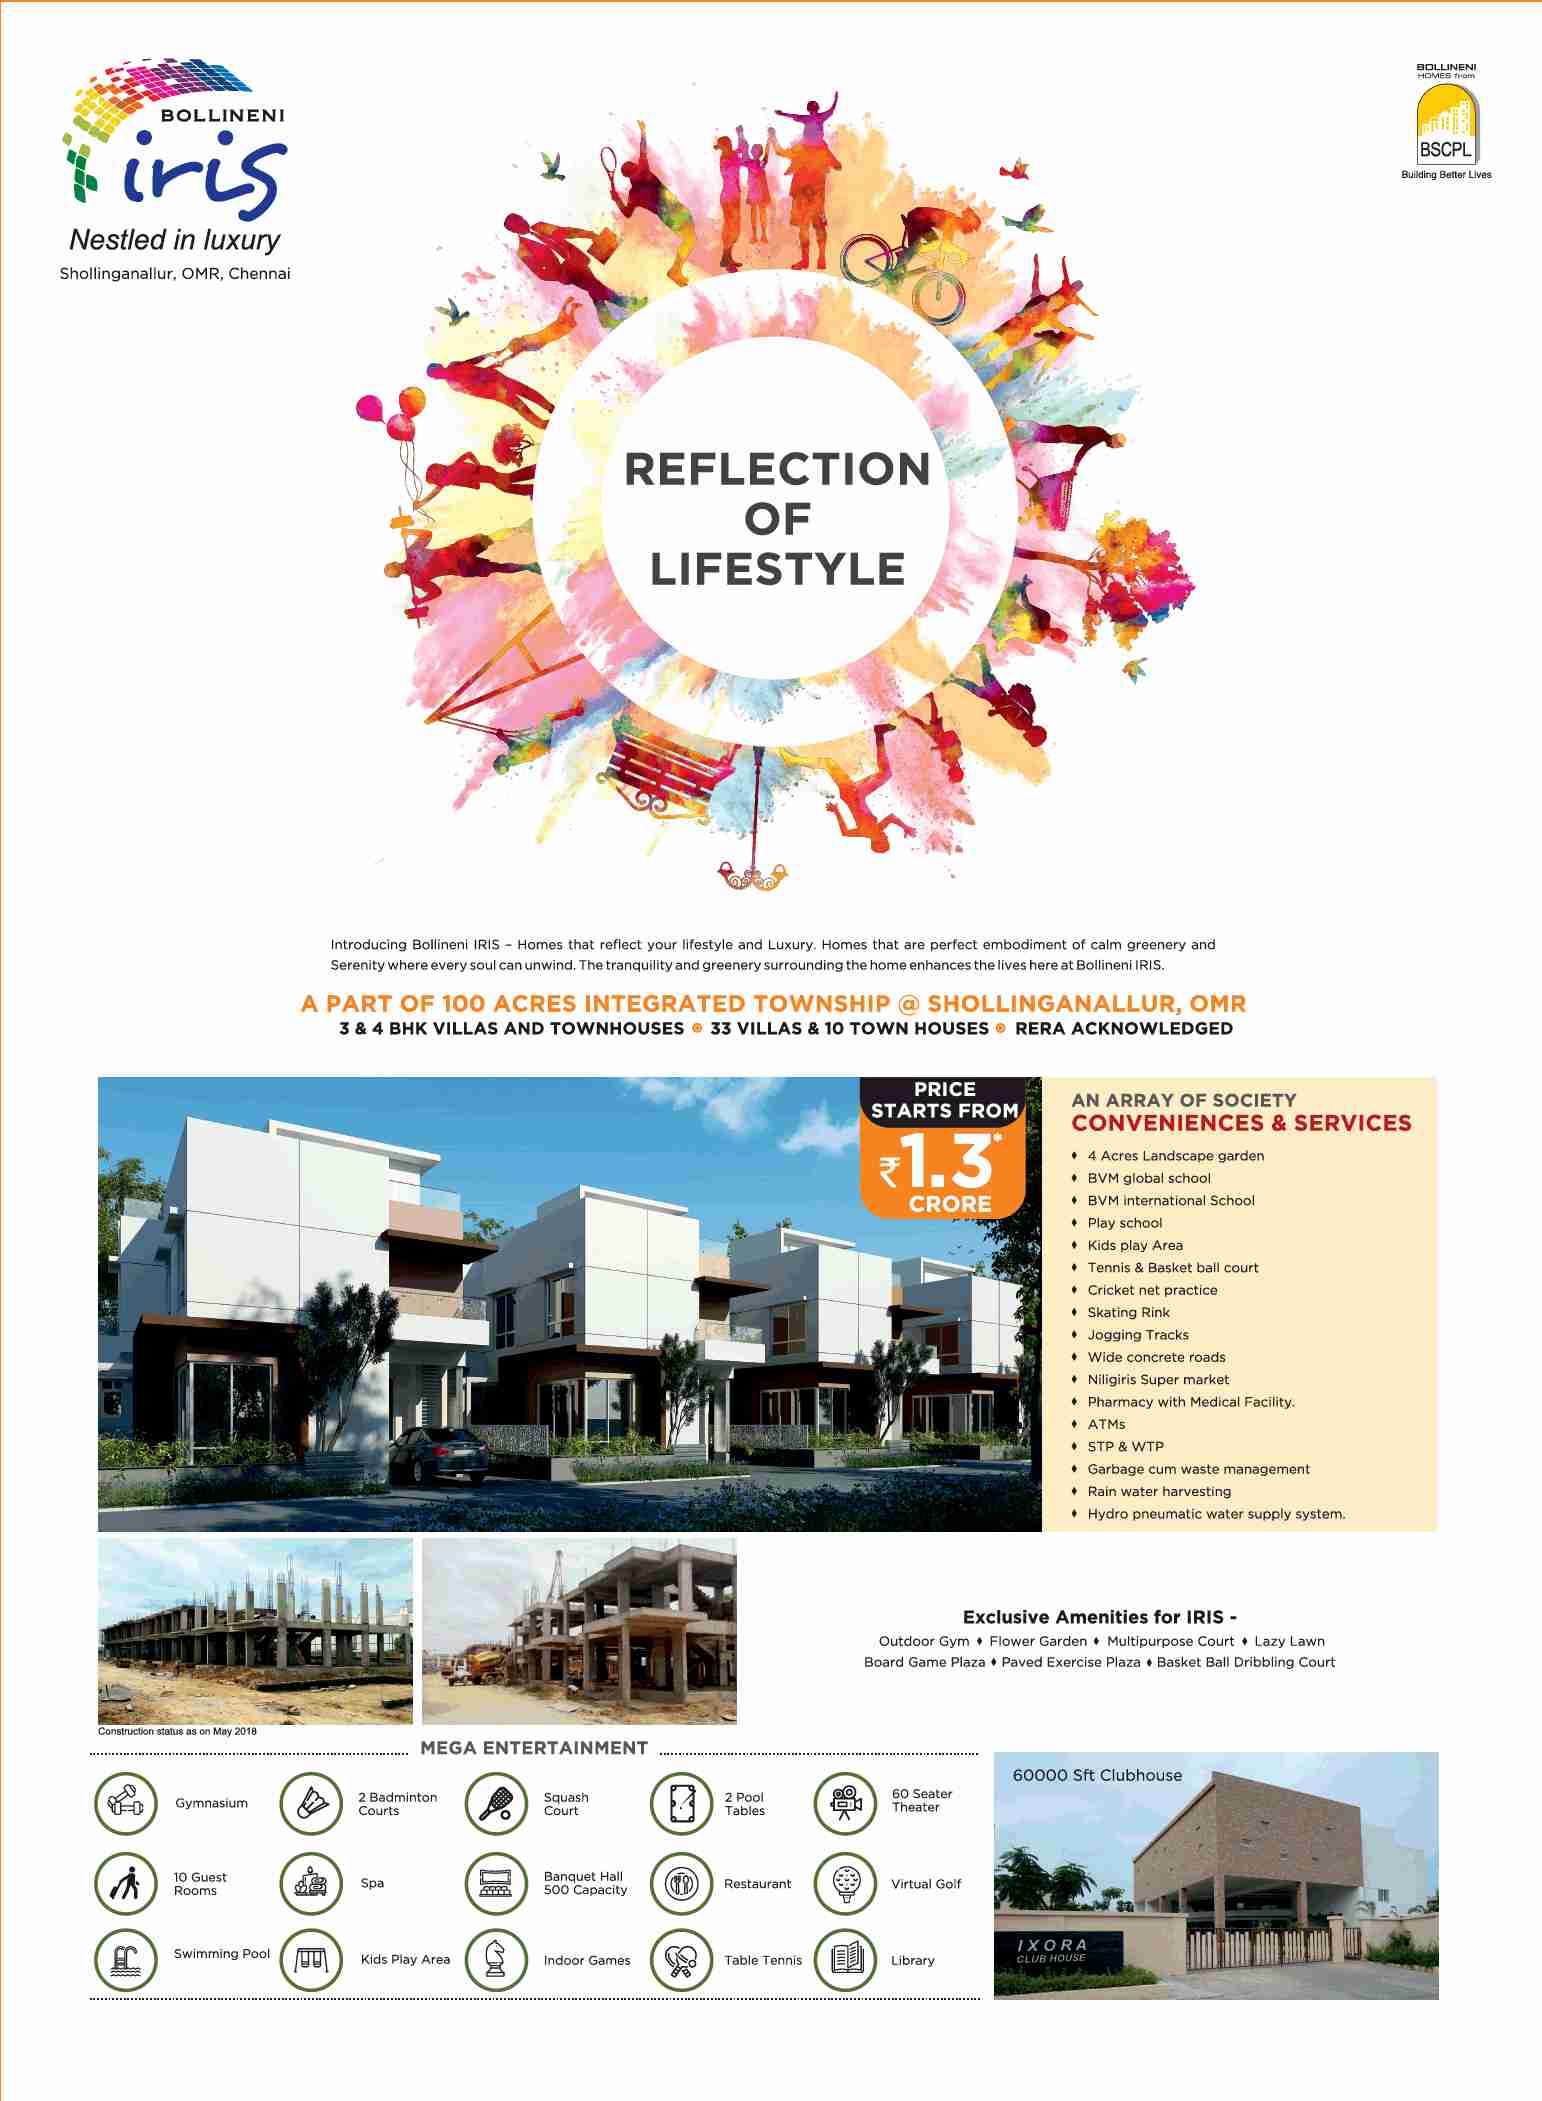 Live in homes that reflect your lifestyle and luxury at BSCPL Bollineni Iris in Chennai